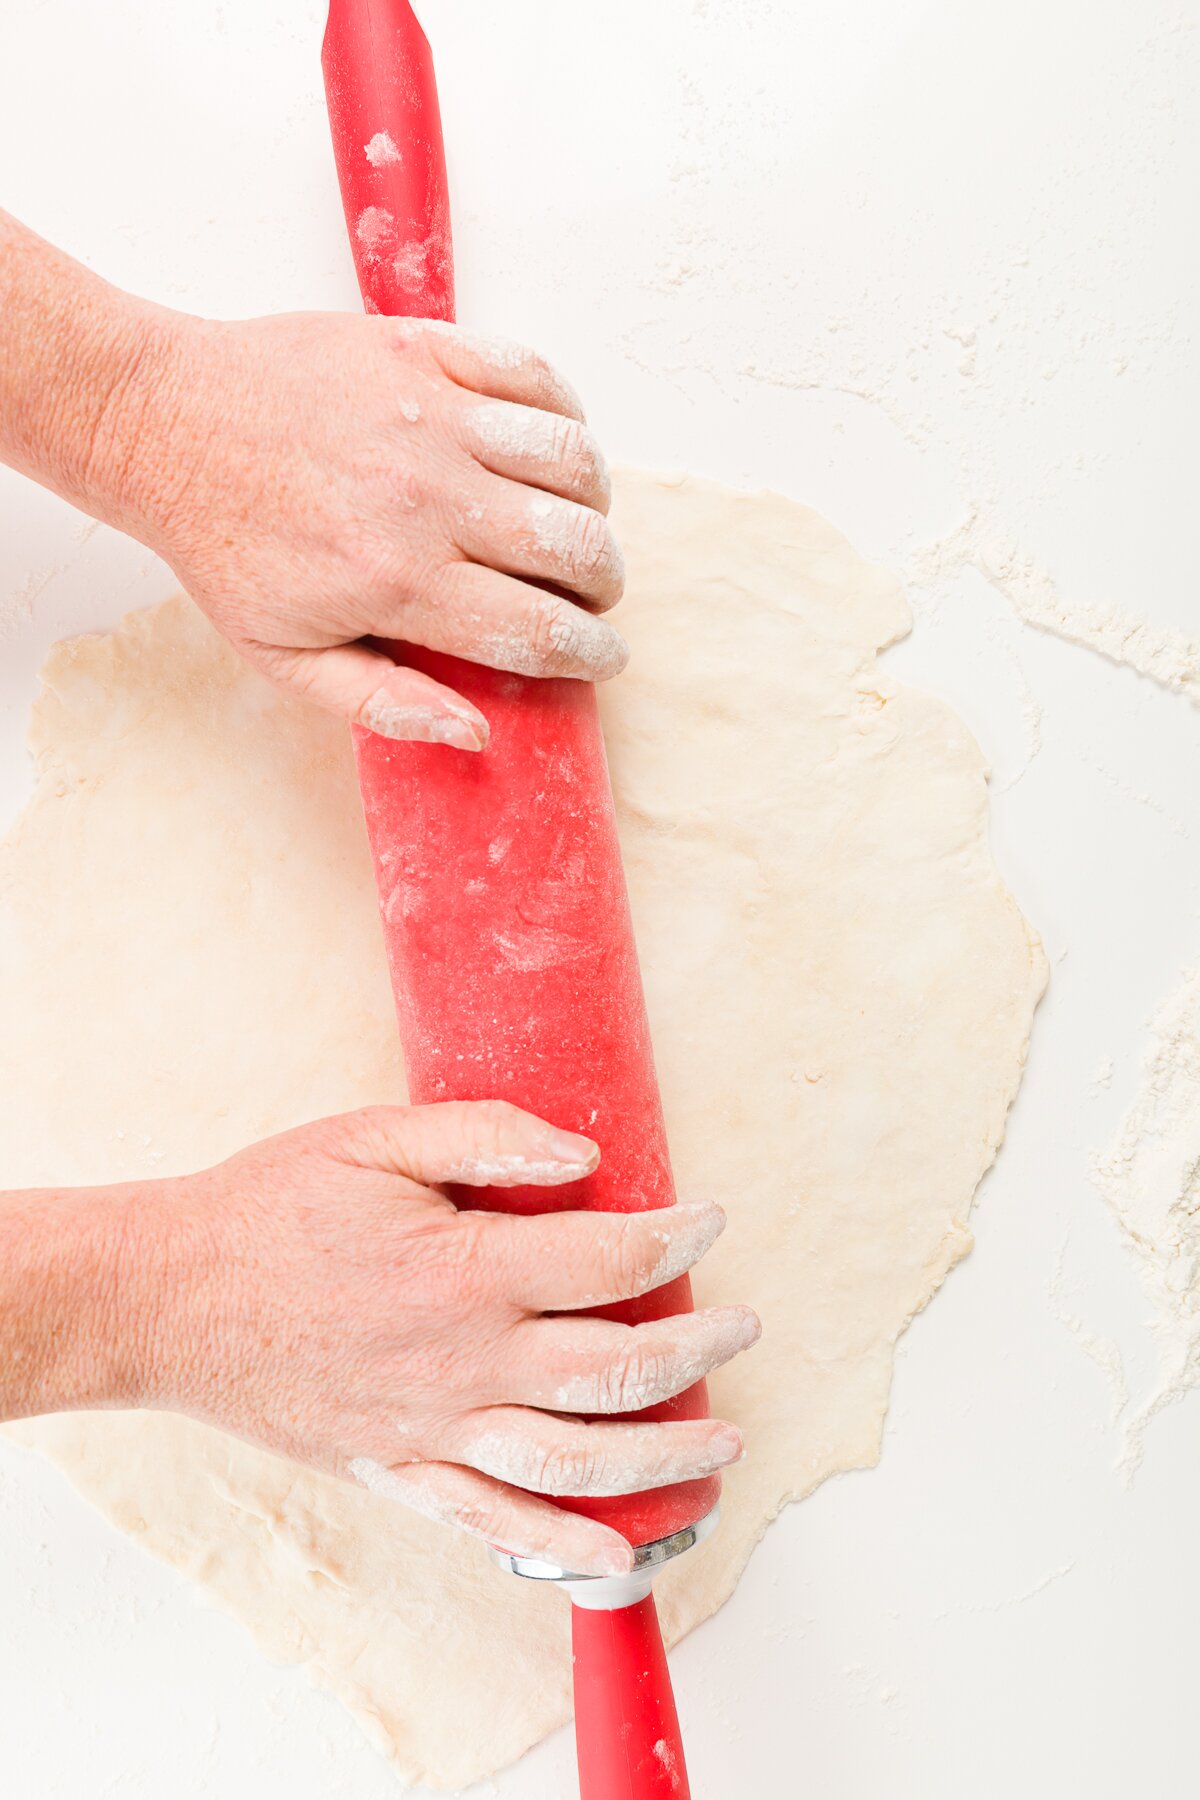 Rolling dough with a red rolling pin